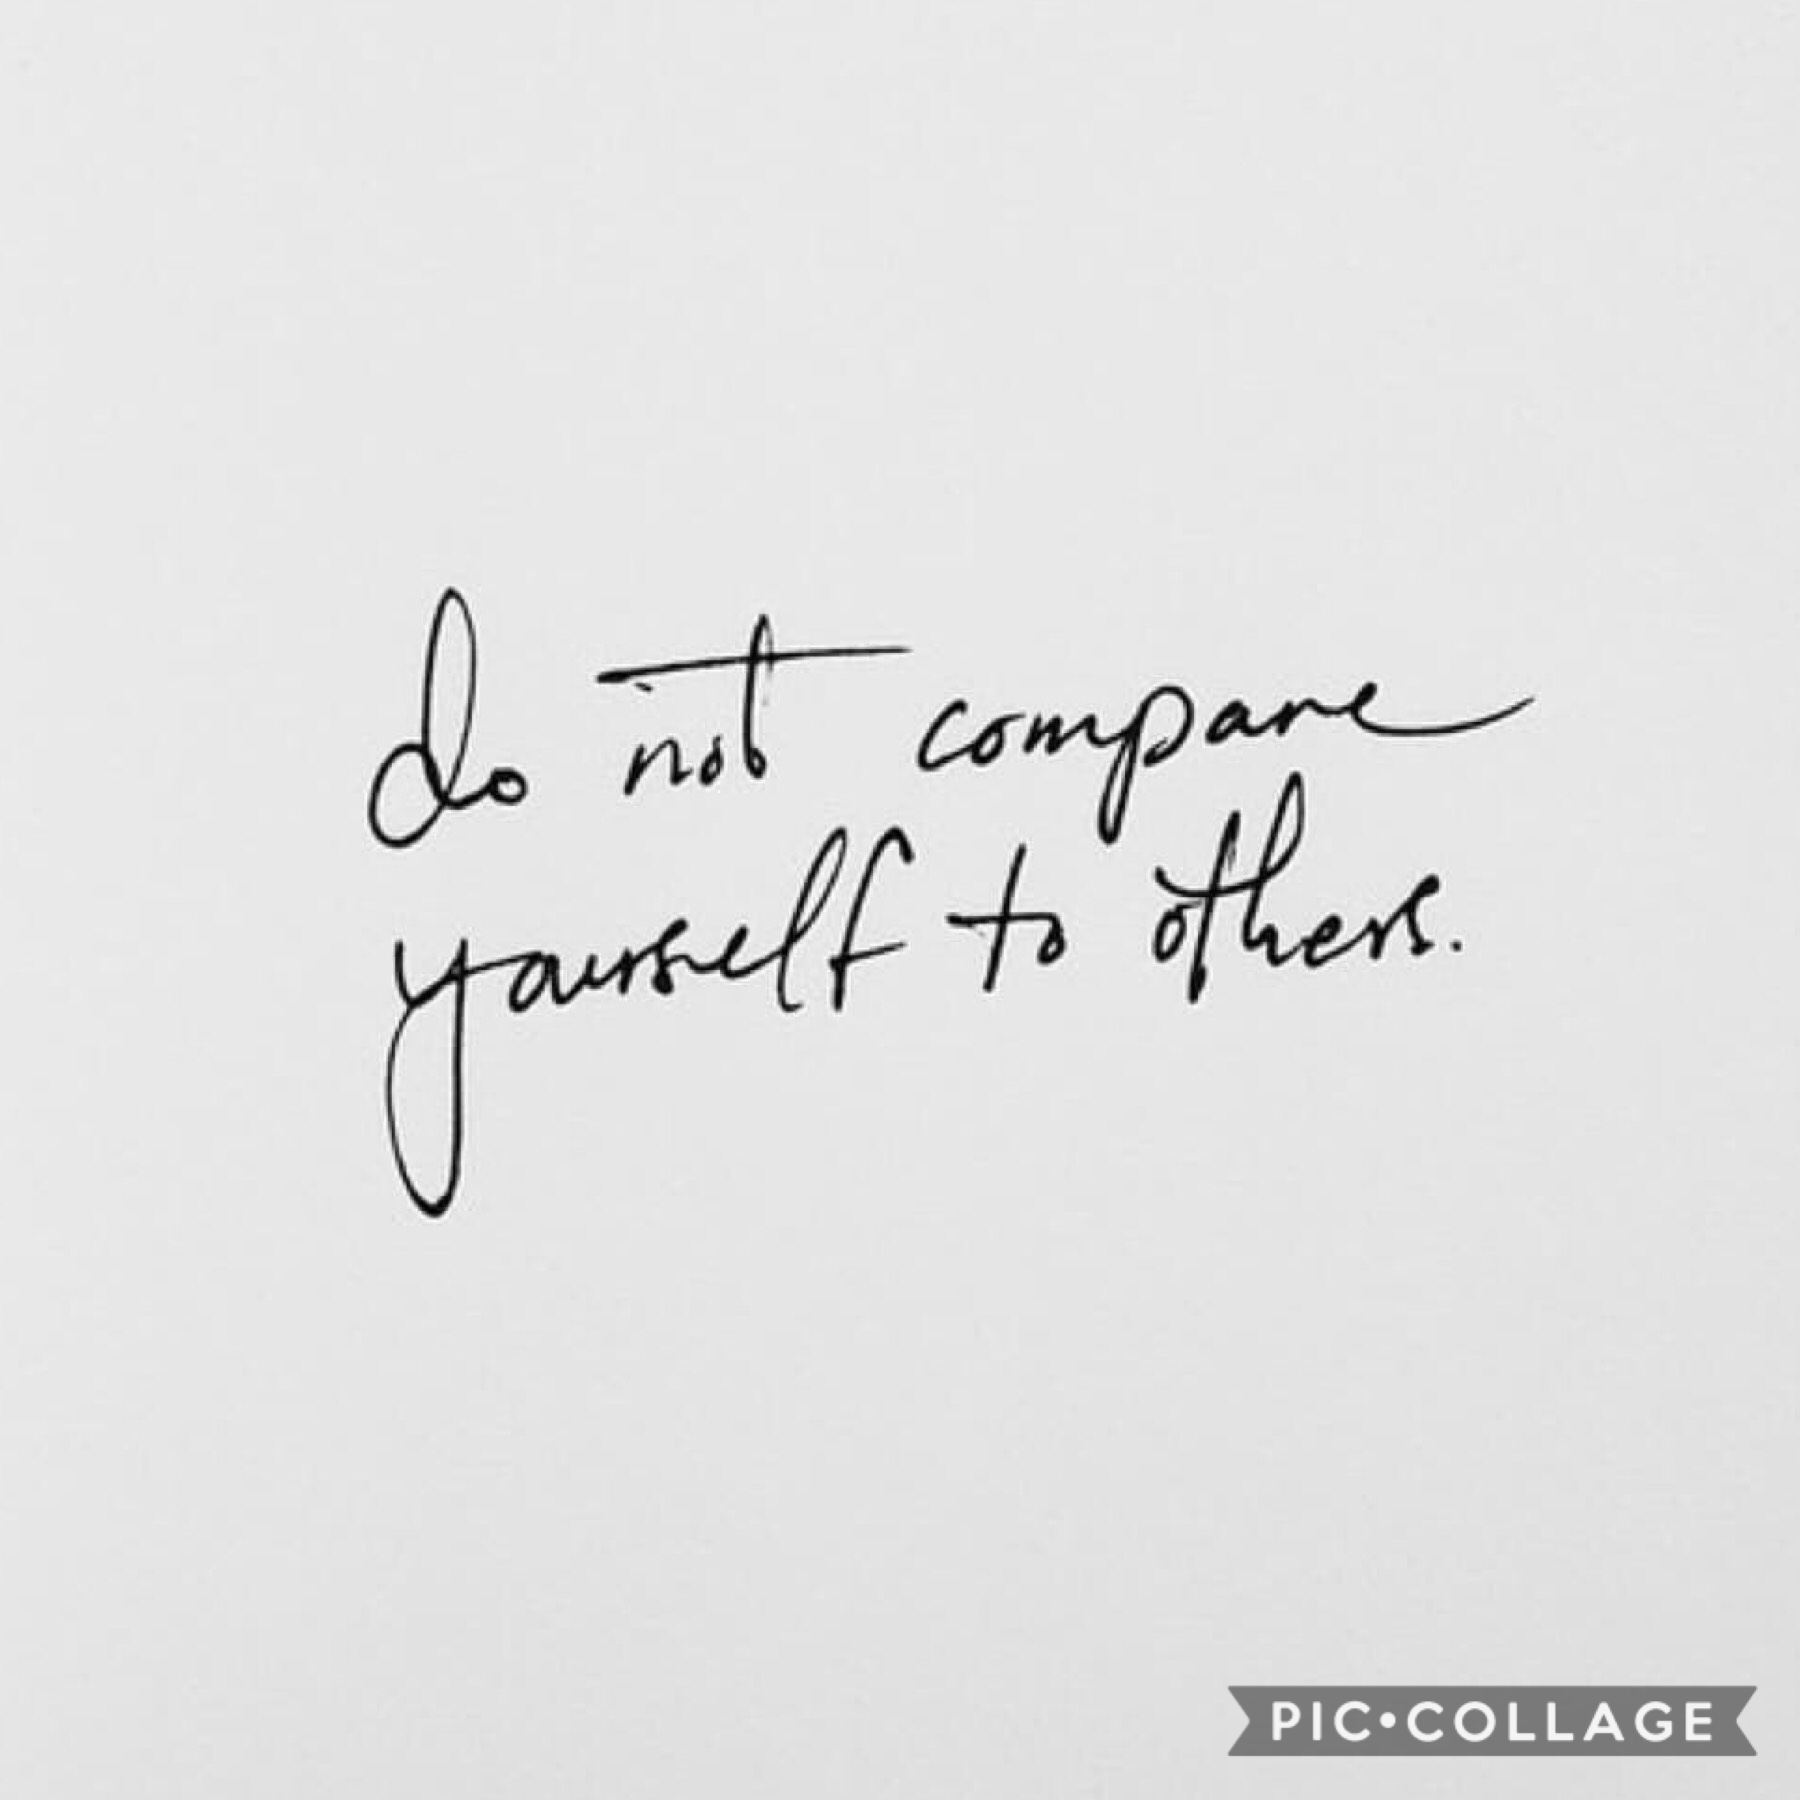 Reposted from @falling-petals-extras💫everyone is unique and beautiful, please don’t compare yourself to others. It never really ends well💛You’re spectacular and you’ve come this far and you can keep going💪I believe in you🌼